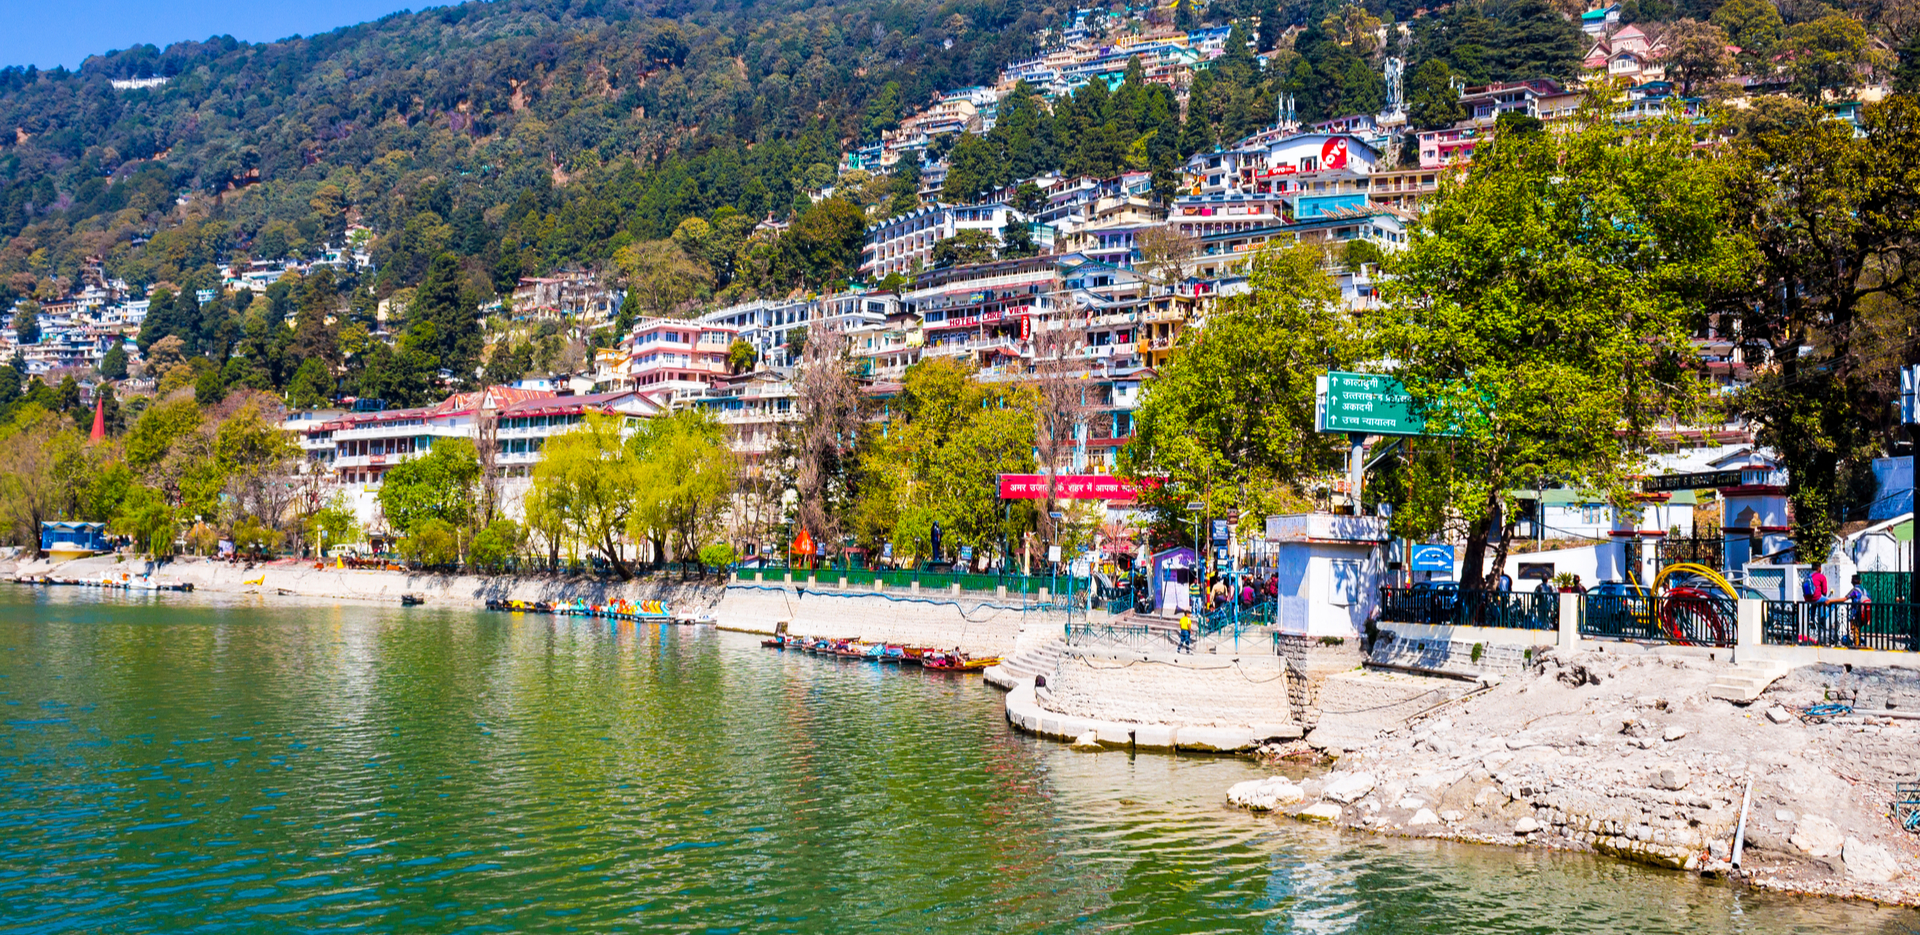 Top 20 Places to Visit In Nainital - Best Tourists Places to Visit in Nainital - Club Mahindra